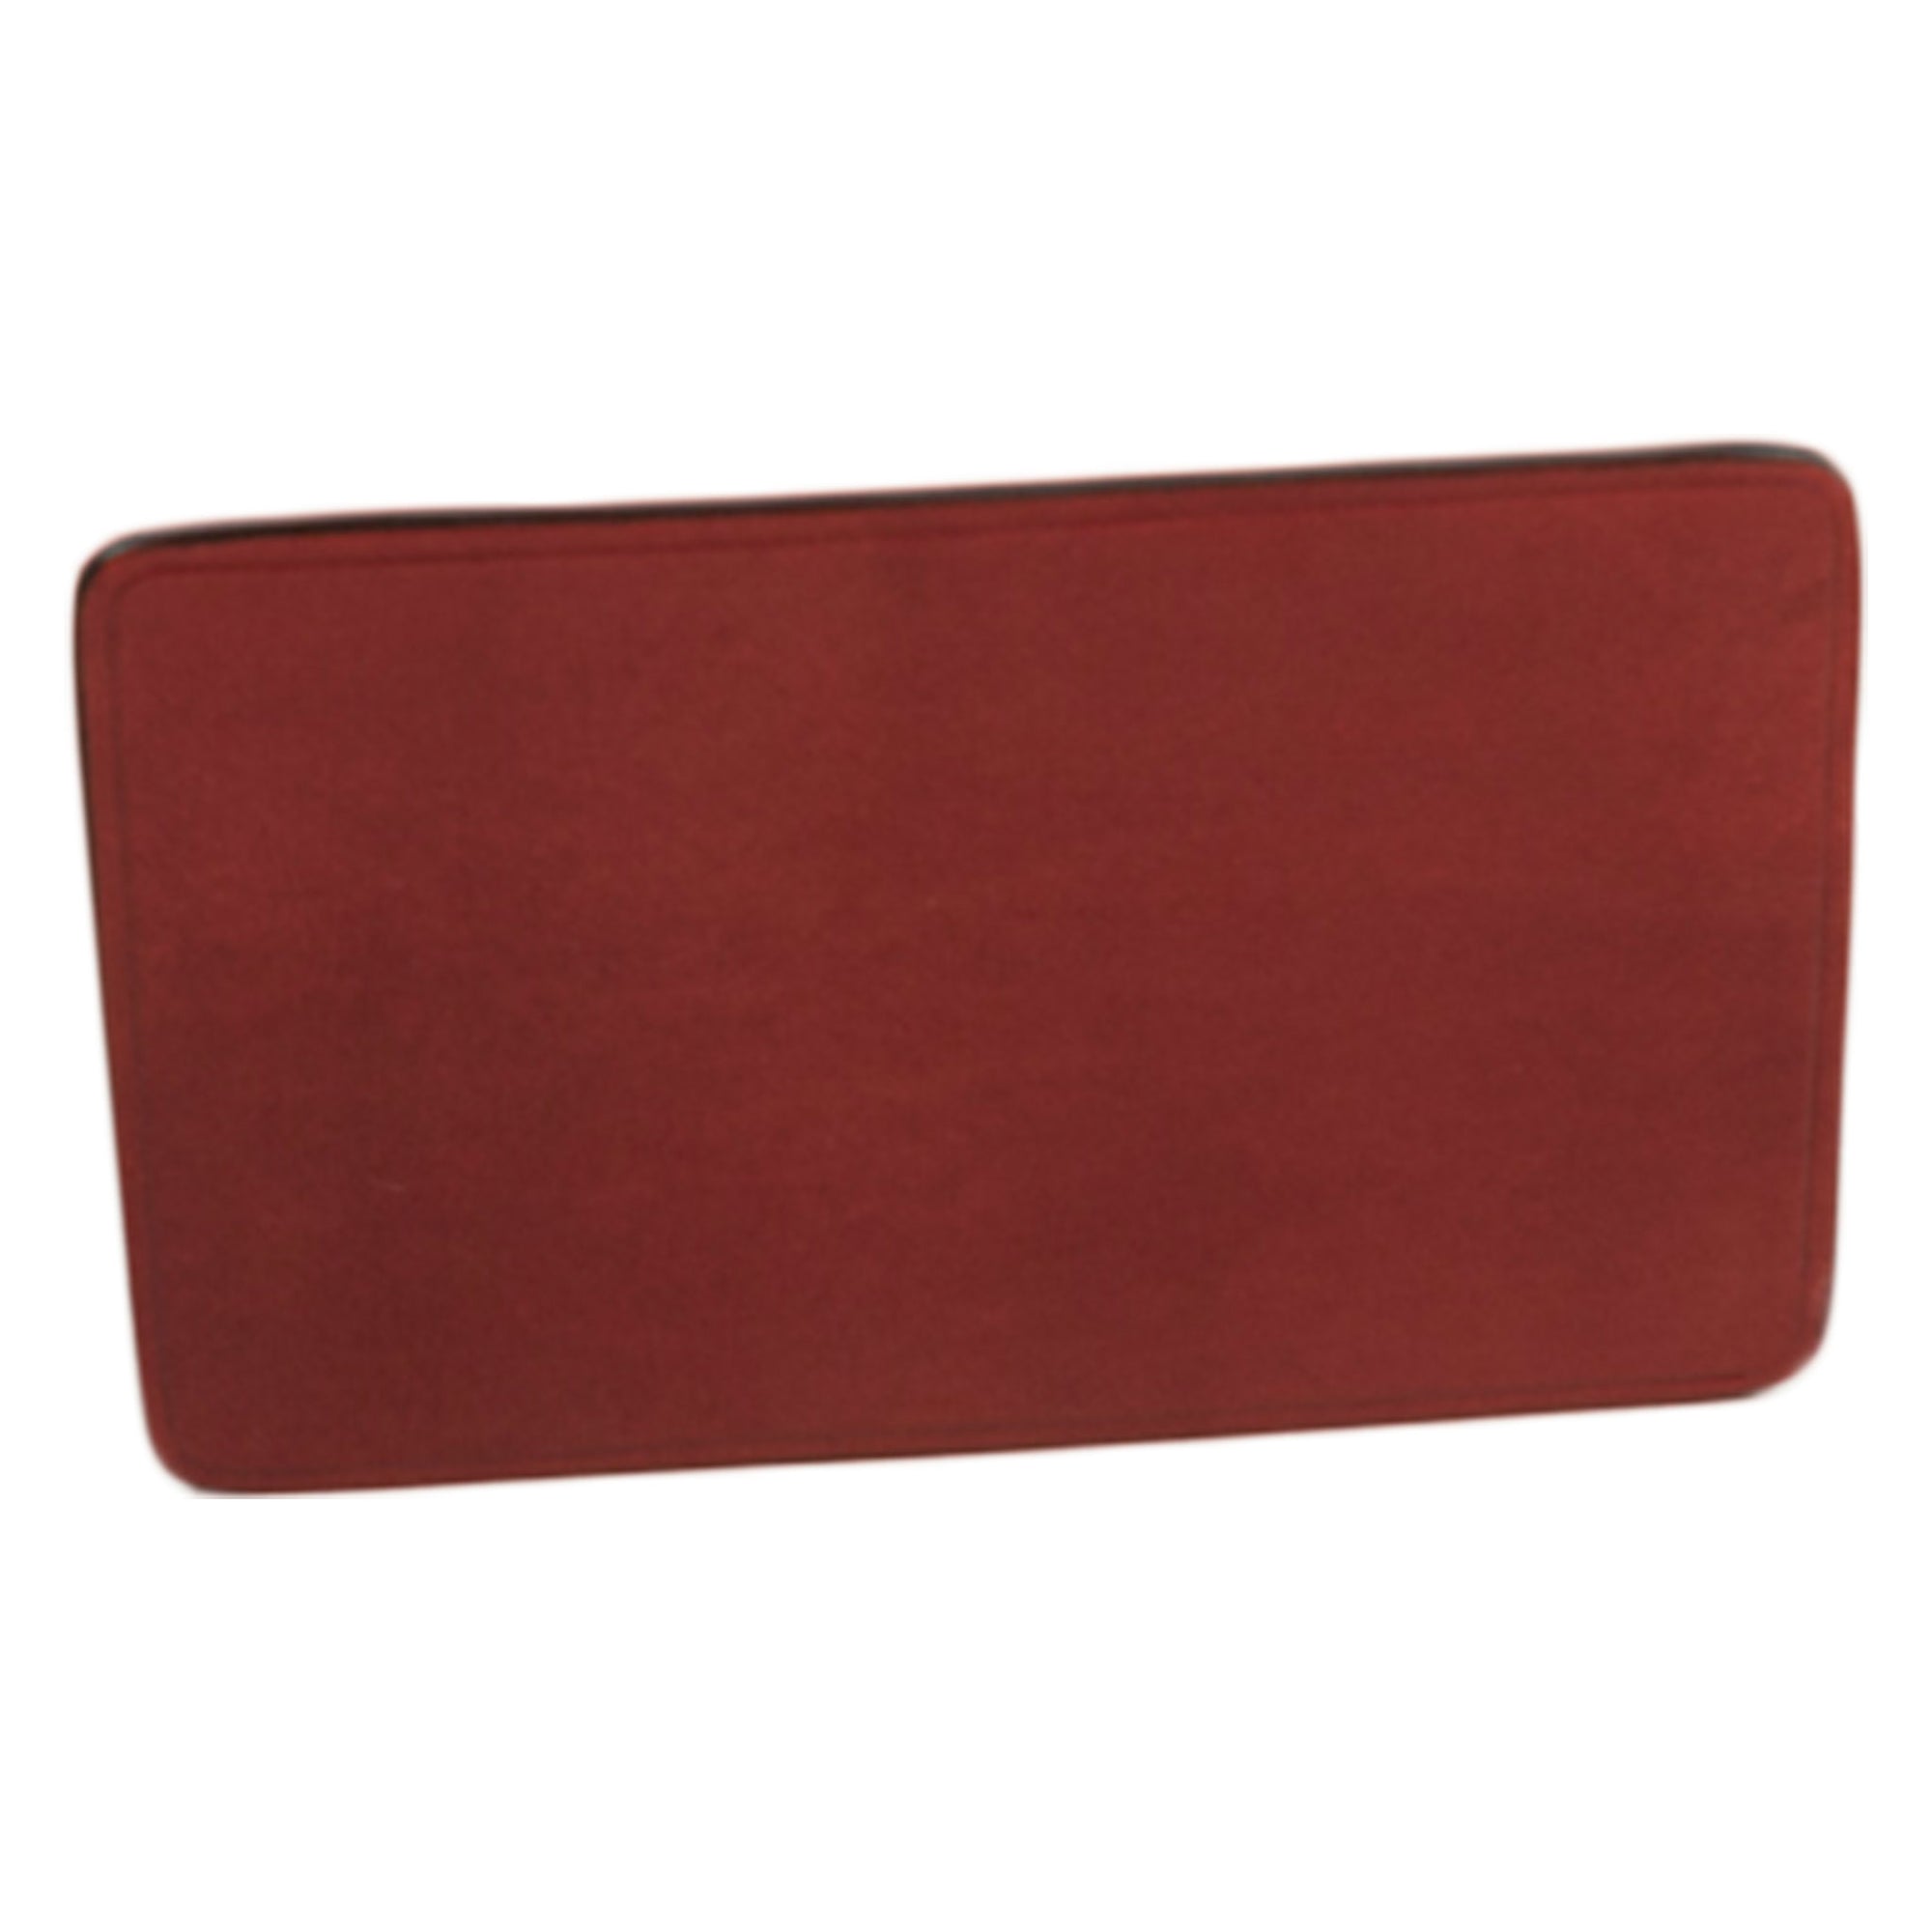 il bussetto magic card wallet in tibetan red